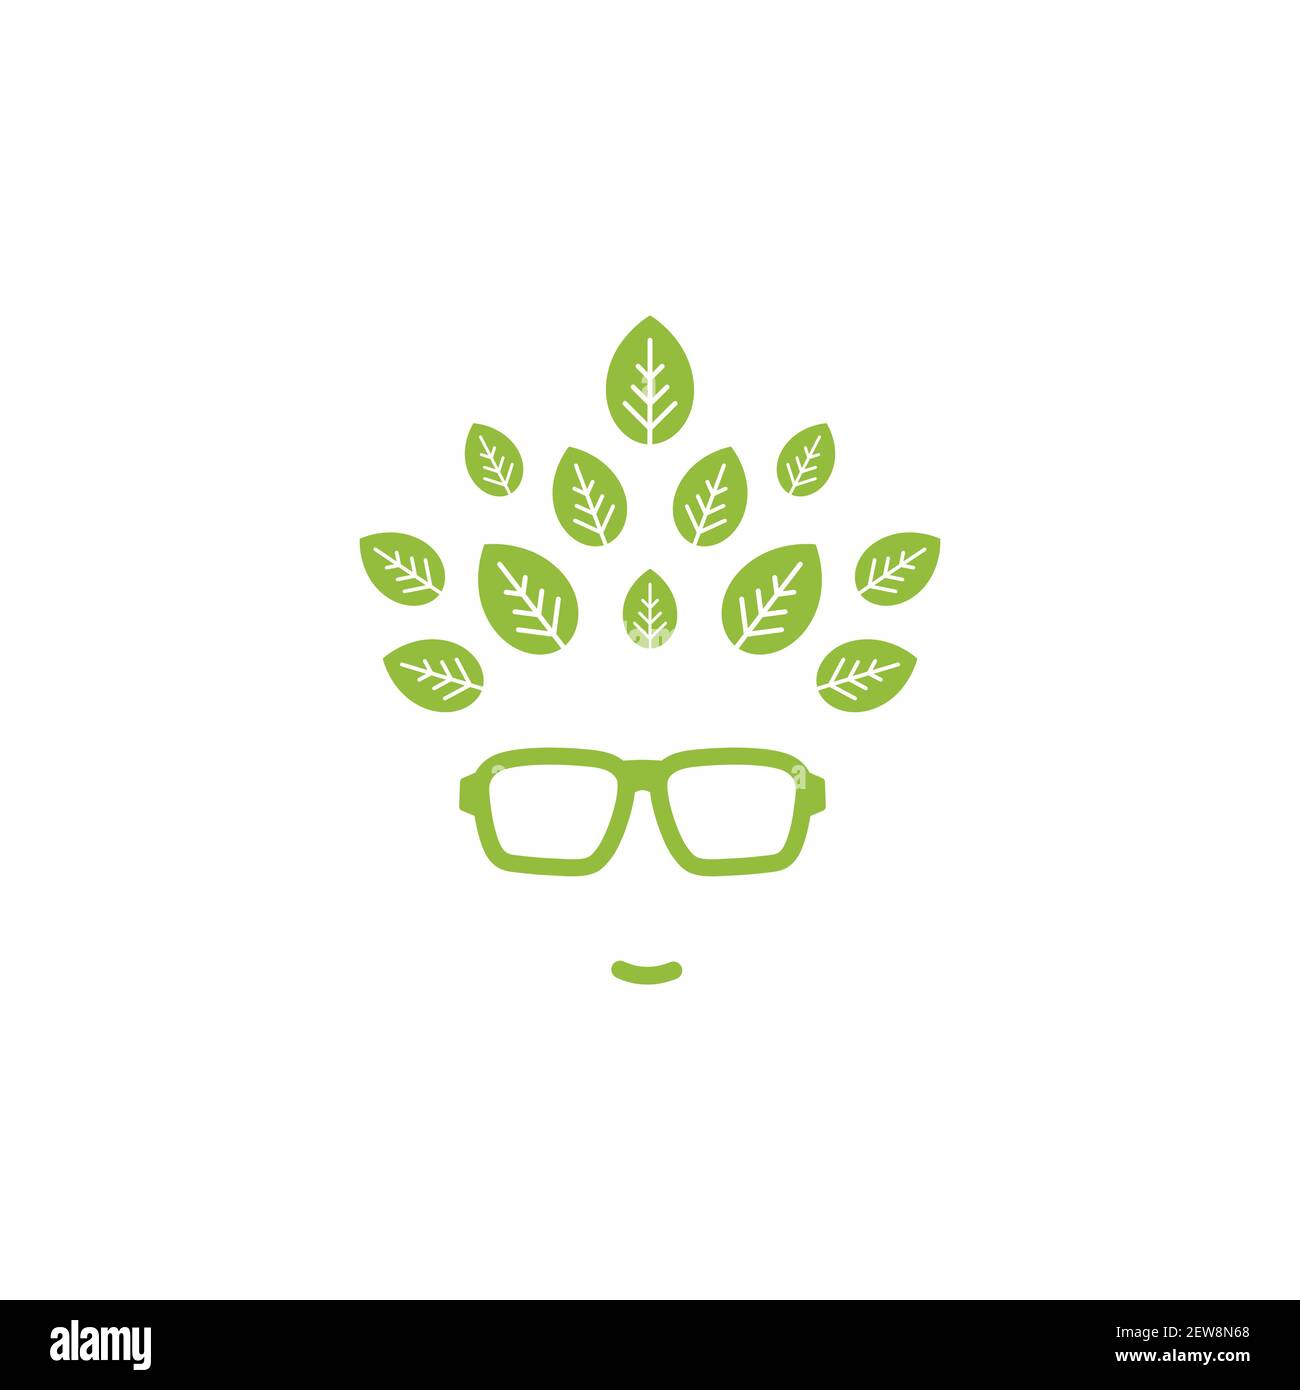 Green silhouette of man's head in hipster glasses with leaves in